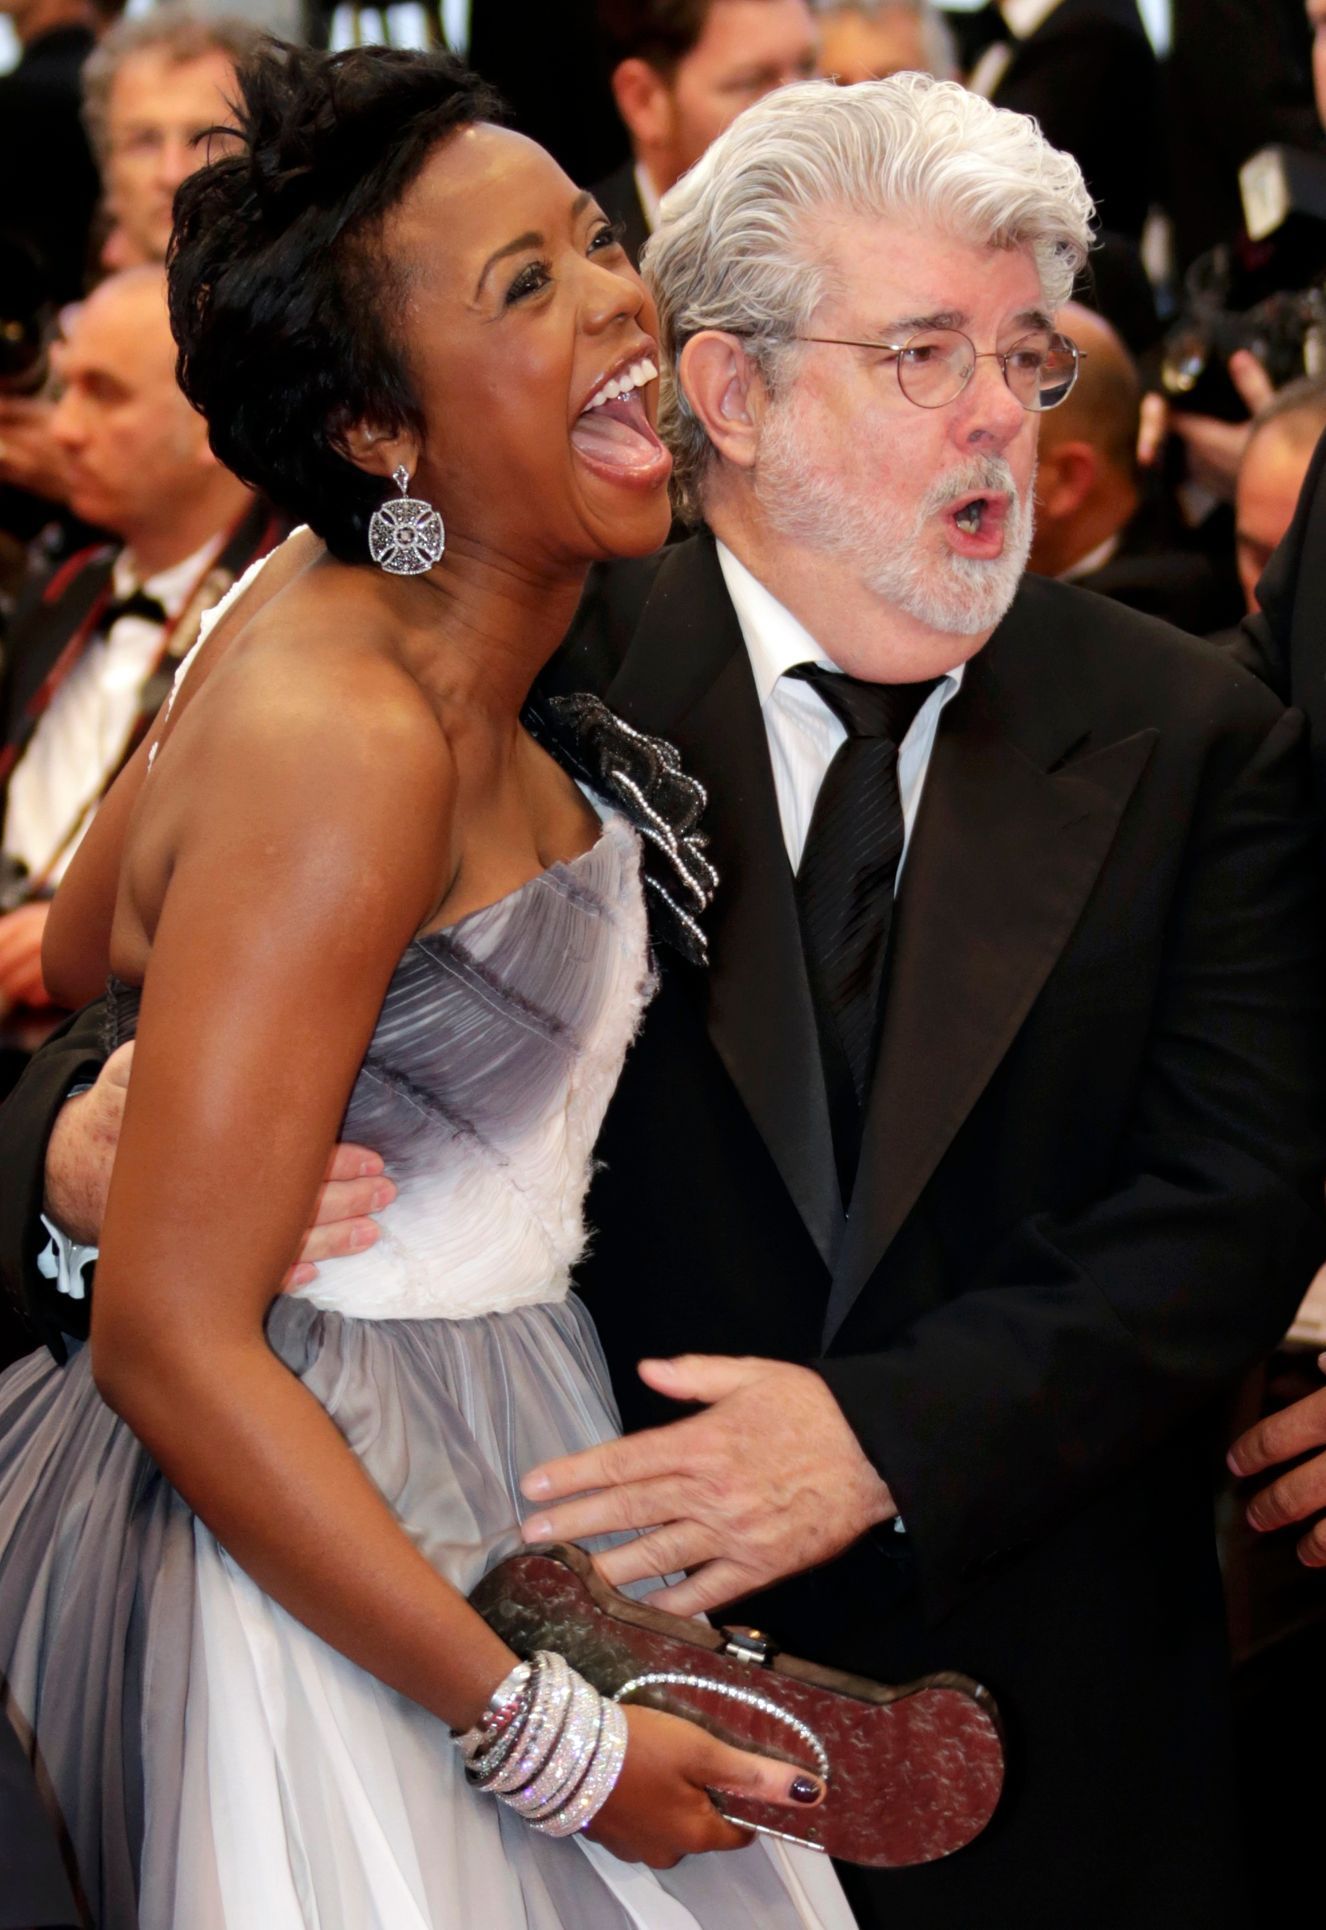 George Lucas and his partner Mellody Hobson